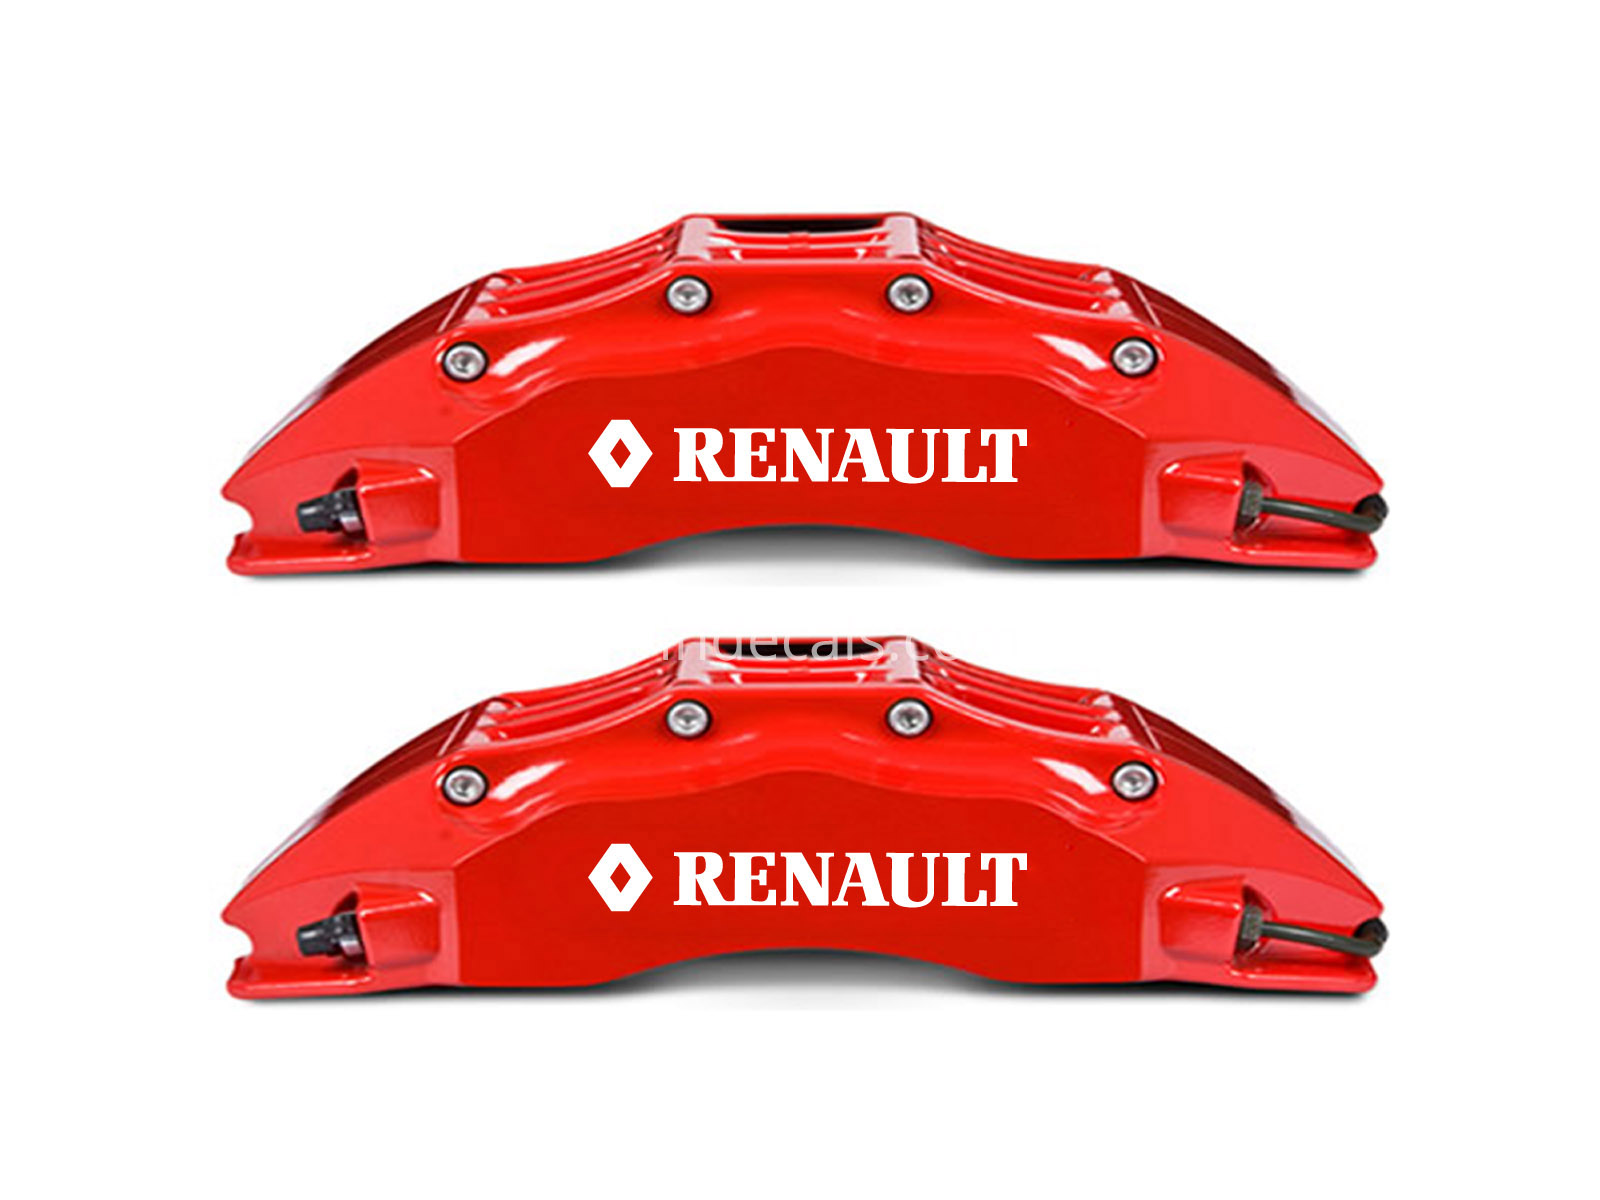 6 x Renault Stickers for Brakes - White